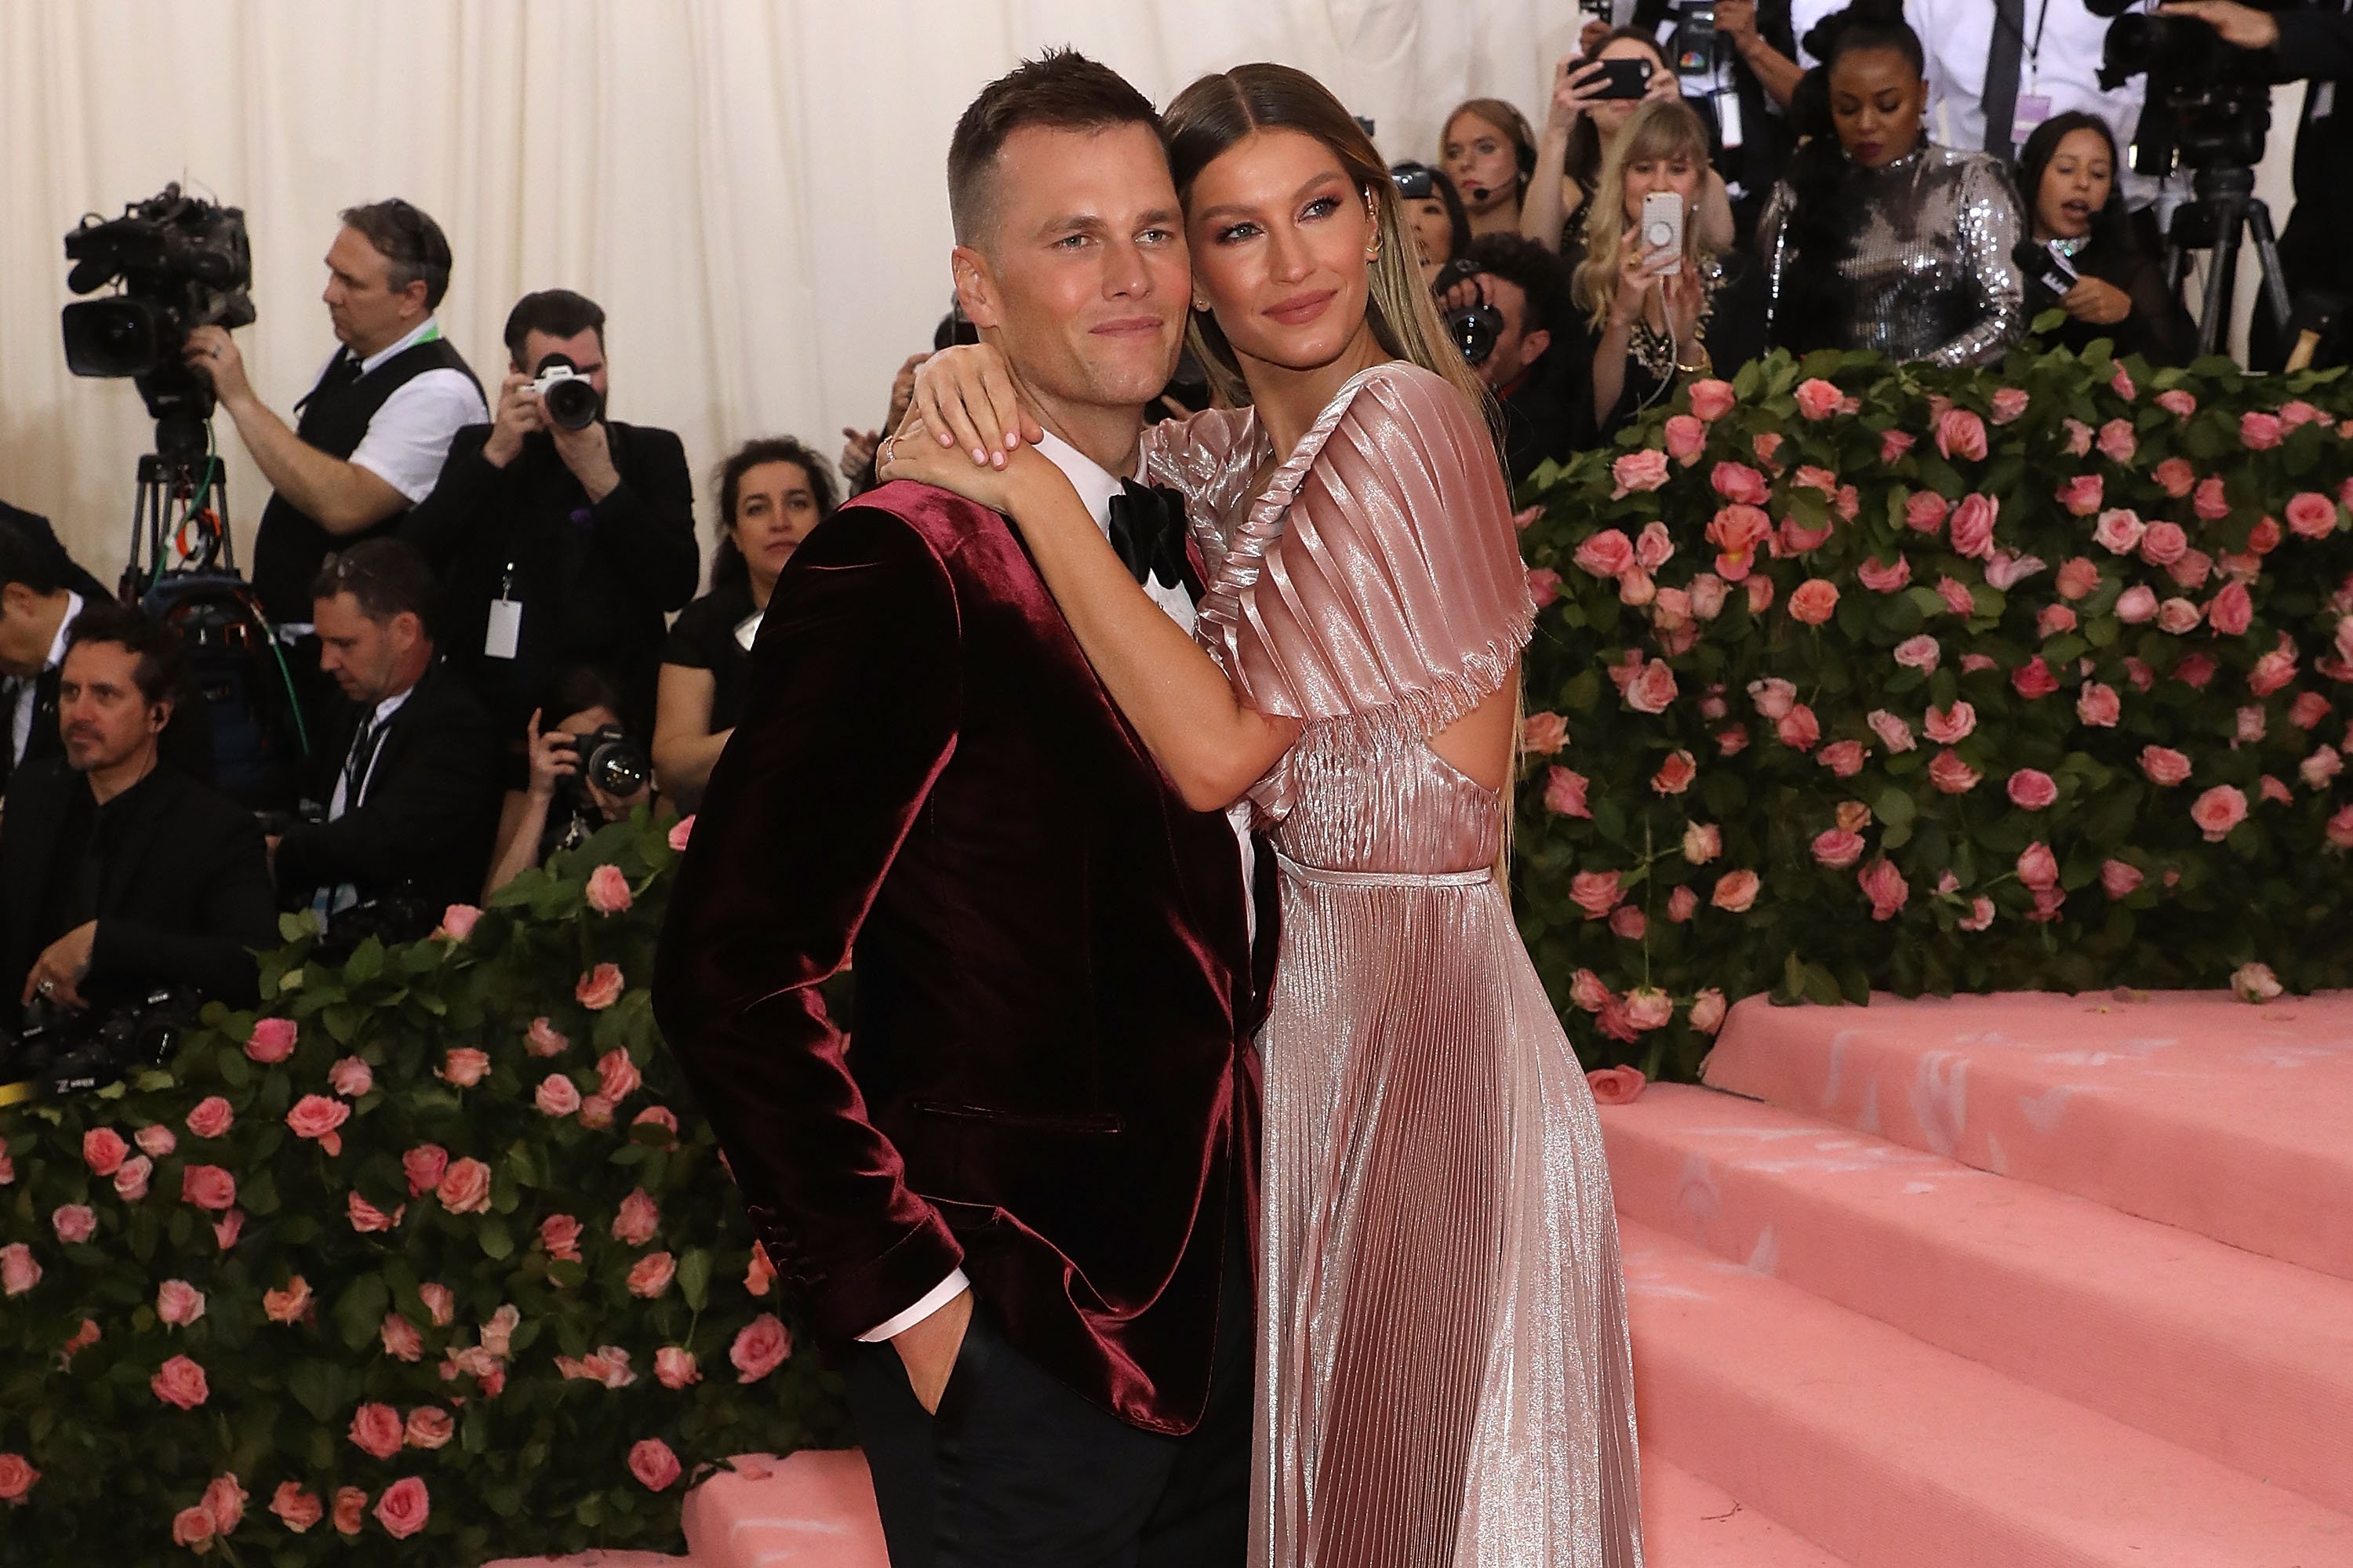 Tom Brady and Gisele Bundchen stand together at an event. 